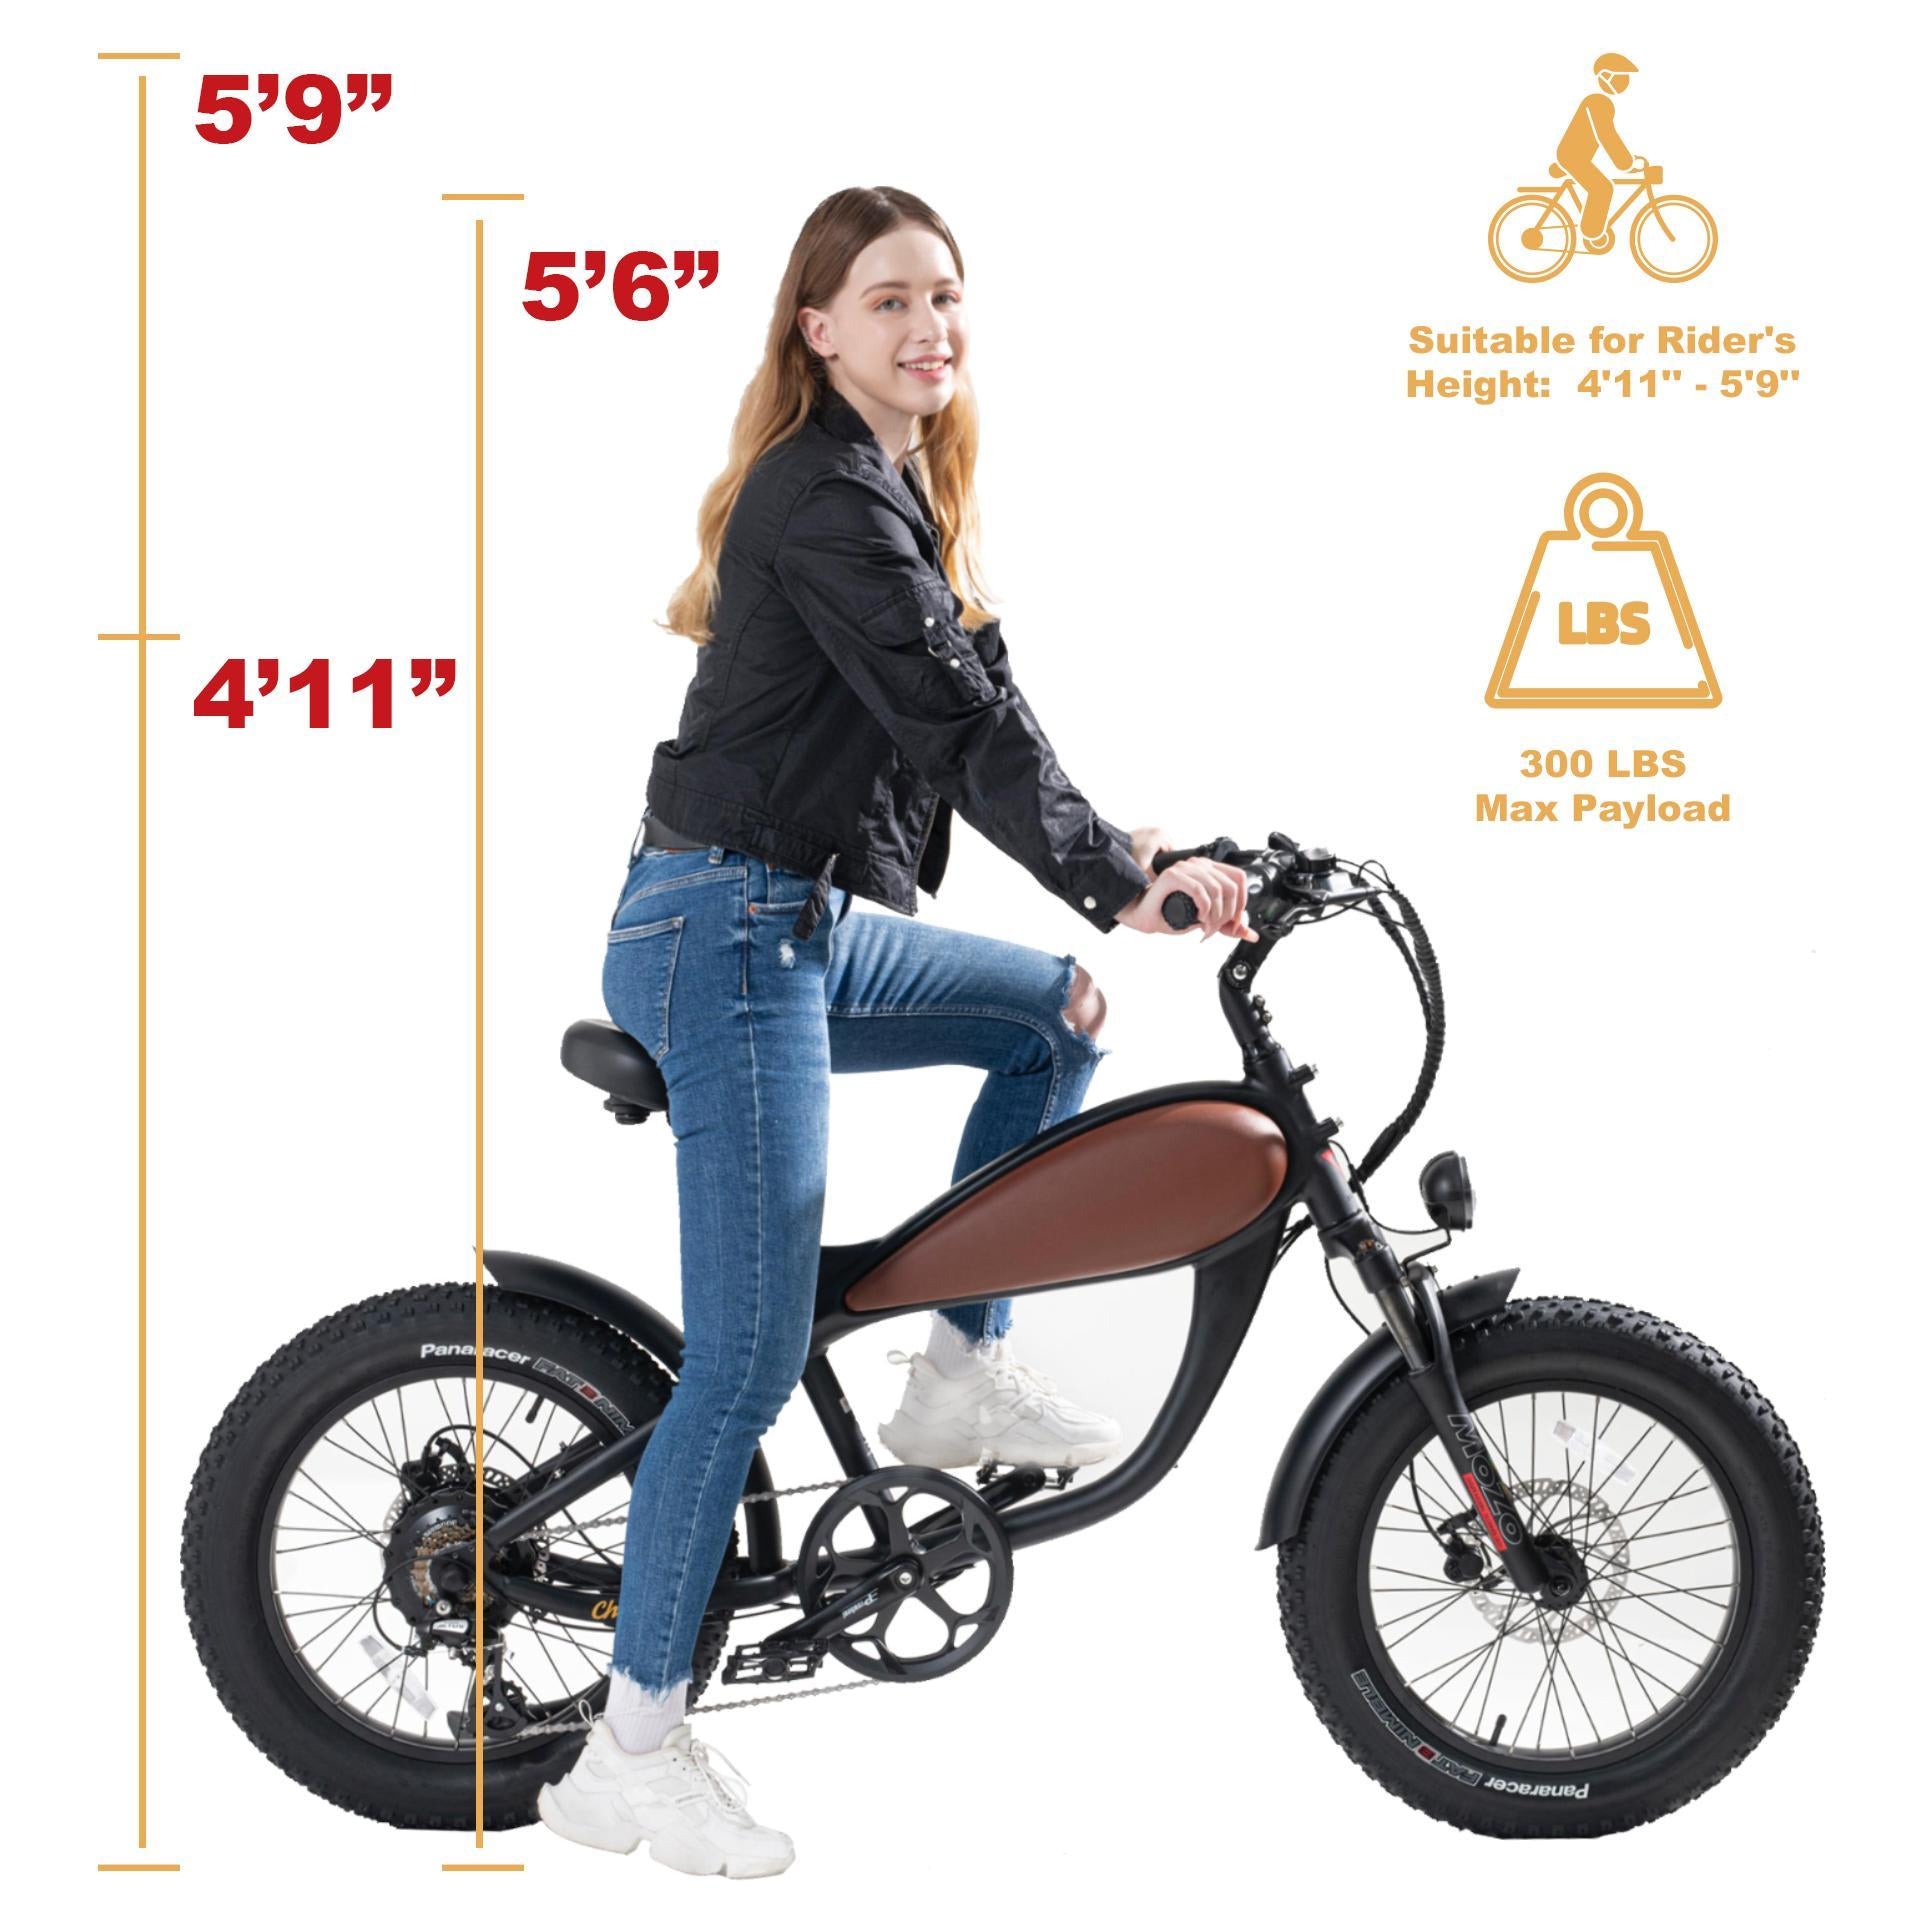 Cheetah mini is offered in one size with an adjustable seat and an adjustable stem, and comfortably fits riders from 4‘1” to 5’9 ".